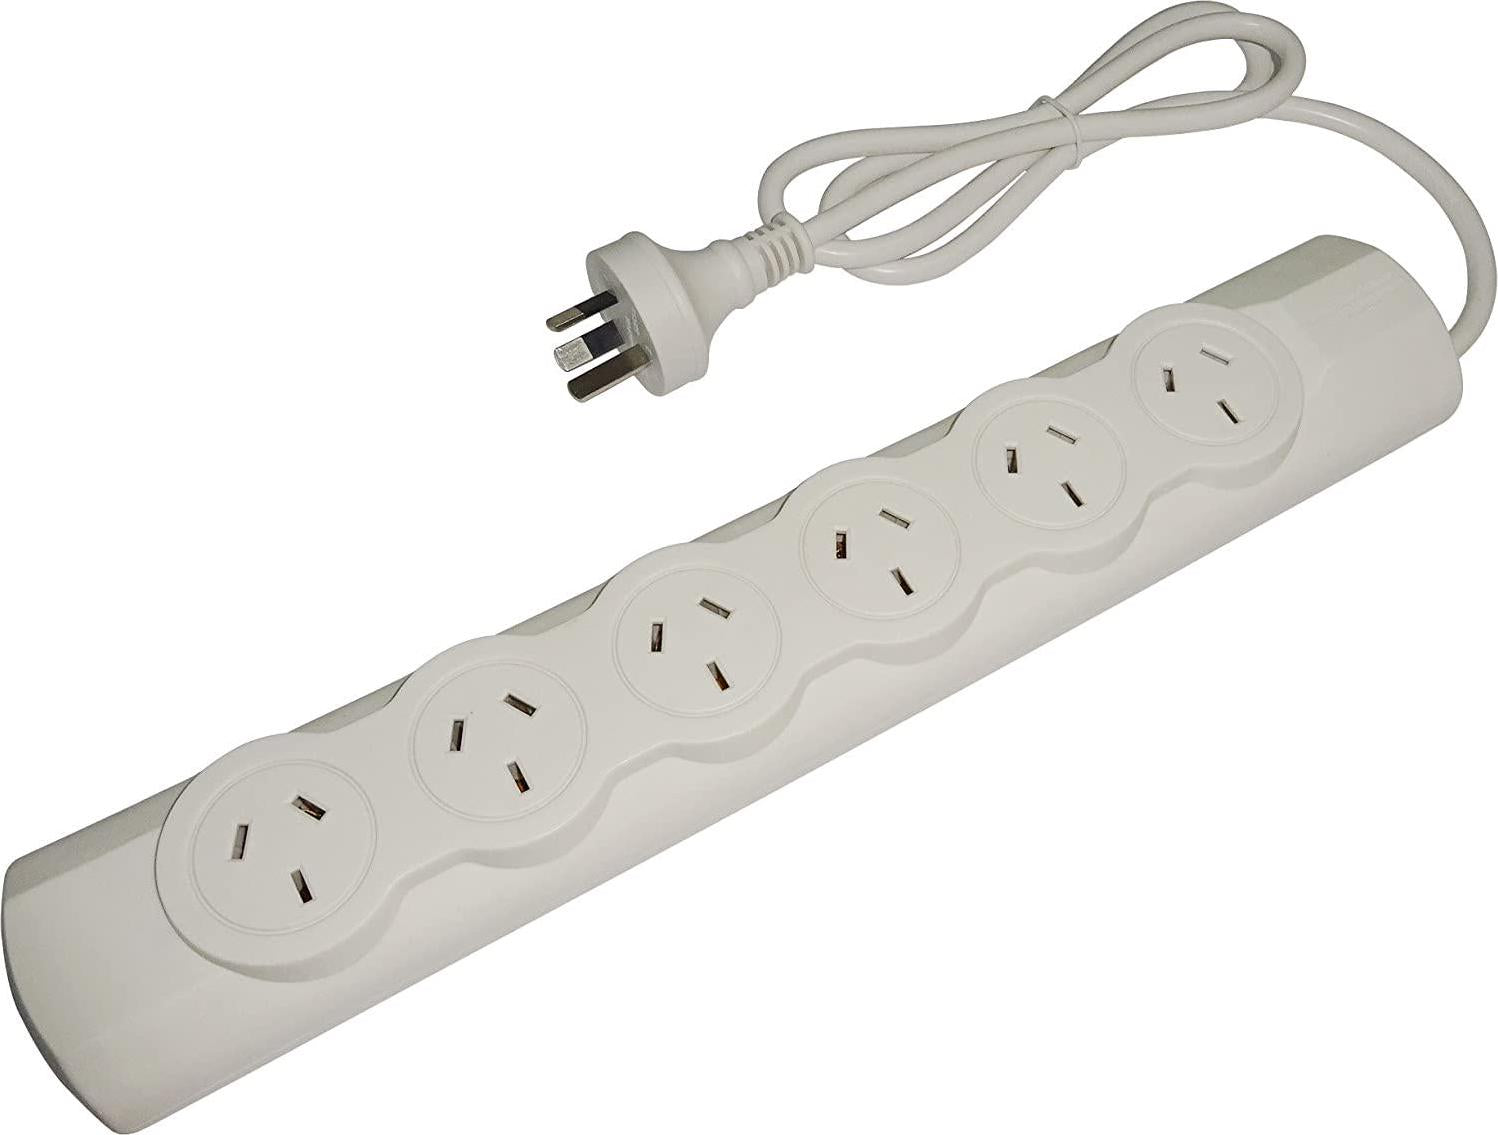 GOLINX, GOLINX 6 Outlet Powerboard with 1m Cable and 10A Overload Protection. White colour. SAA approved for use in Australia and New Zealand